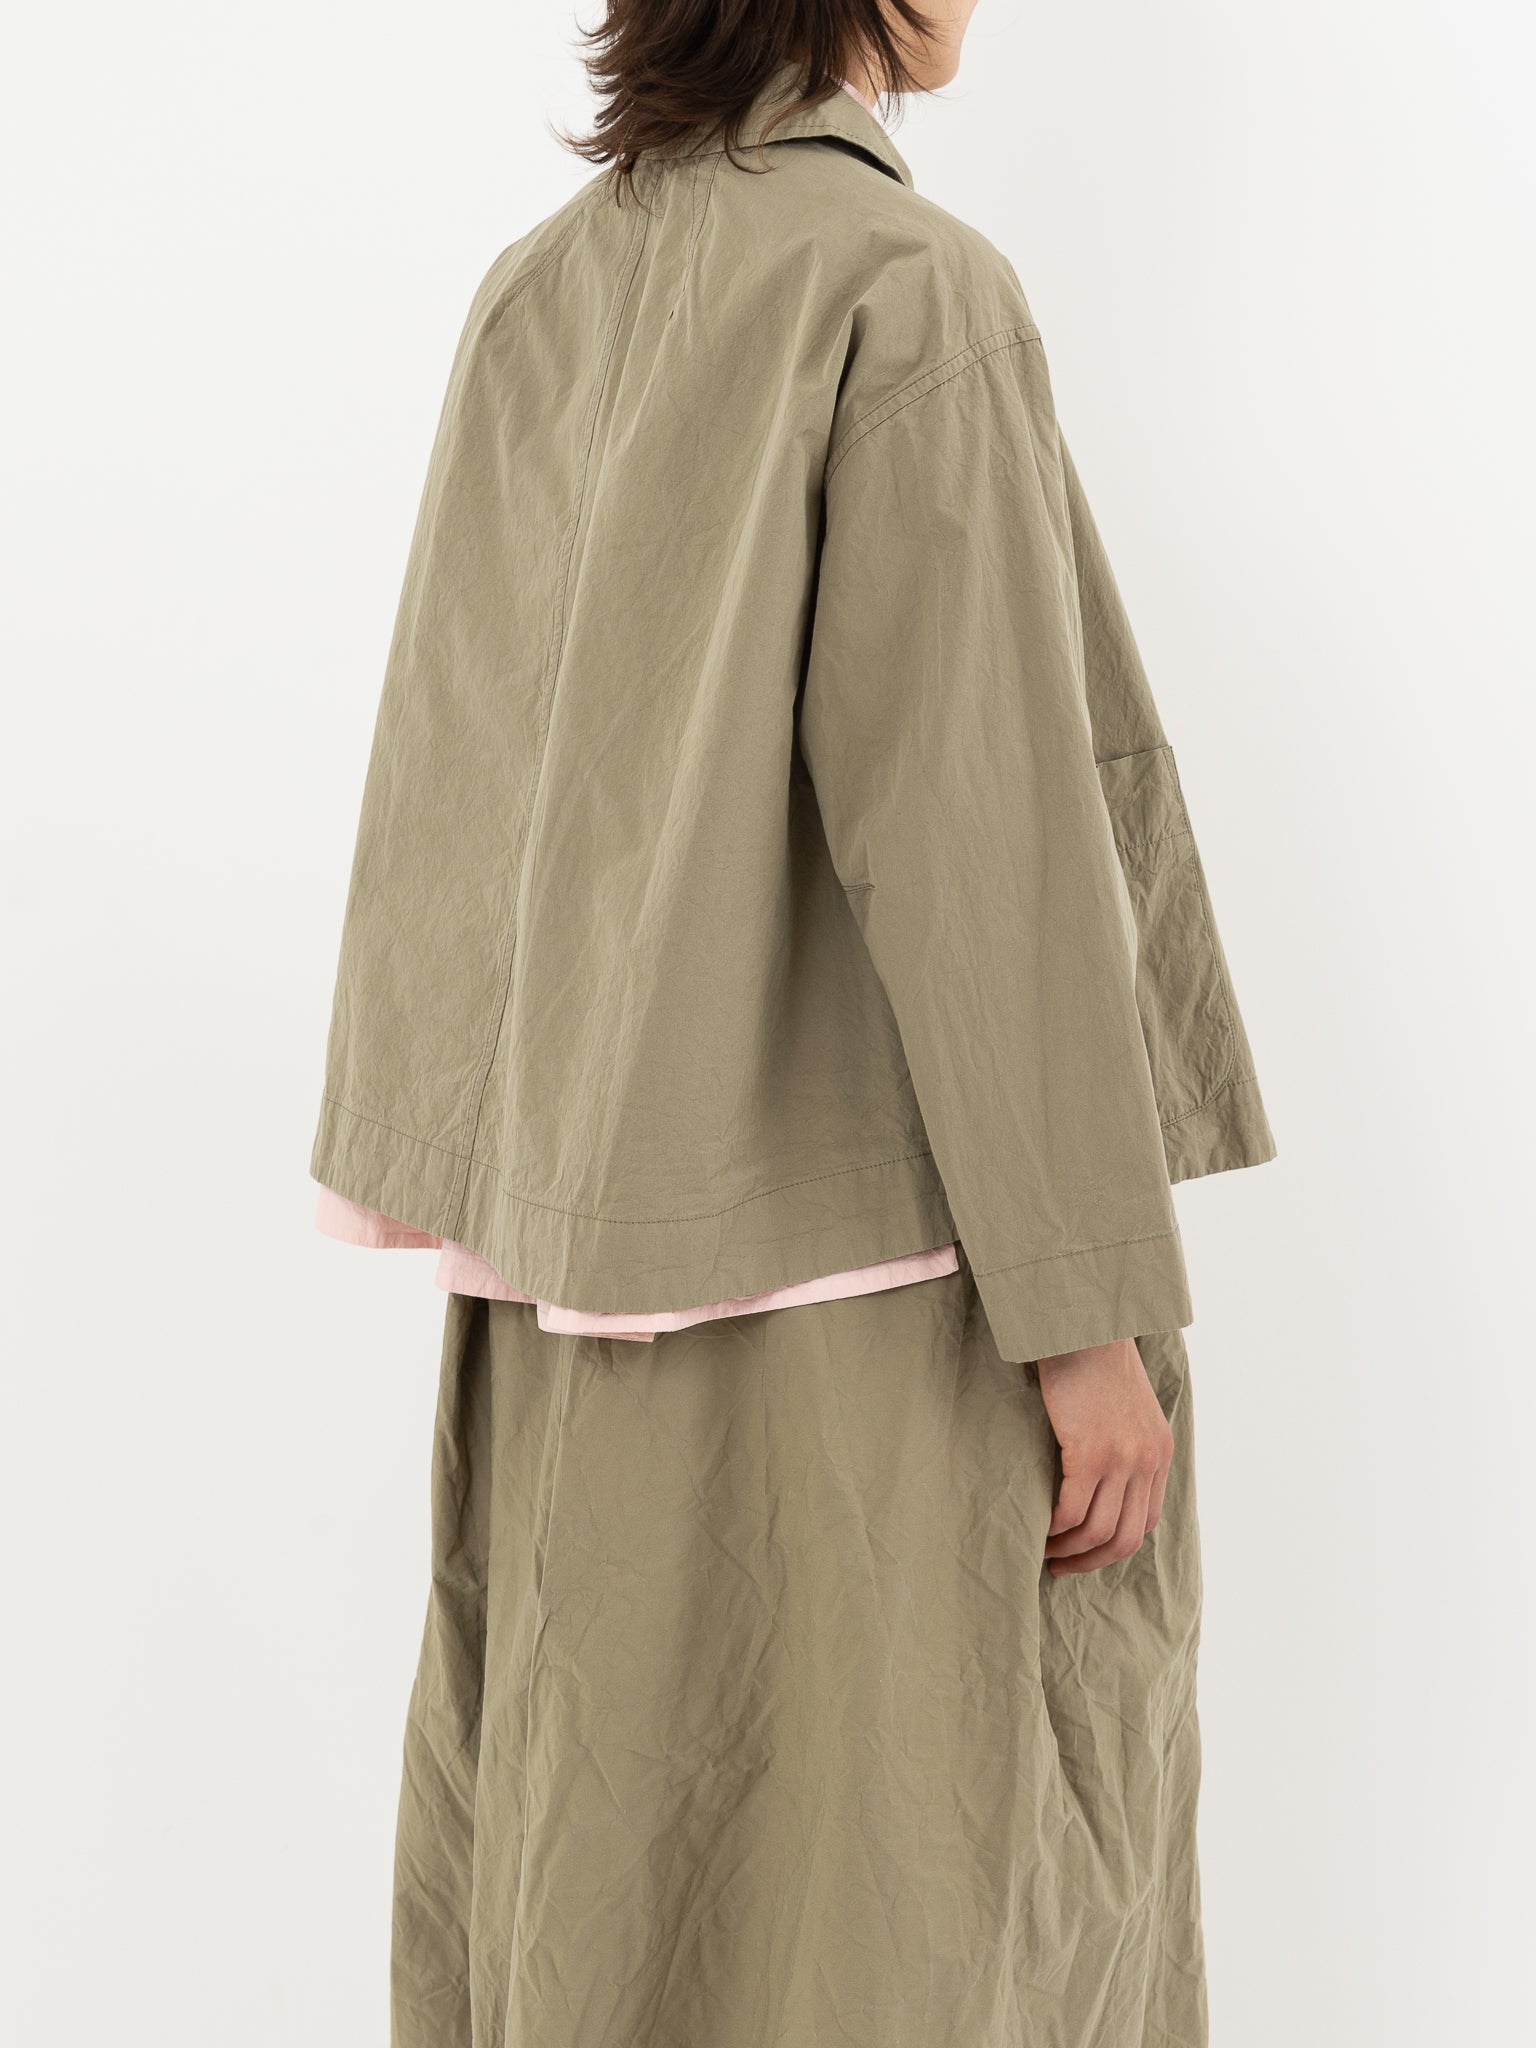 Casey Casey Dries Travail Jacket, Sesame - Worthwhile, Inc.